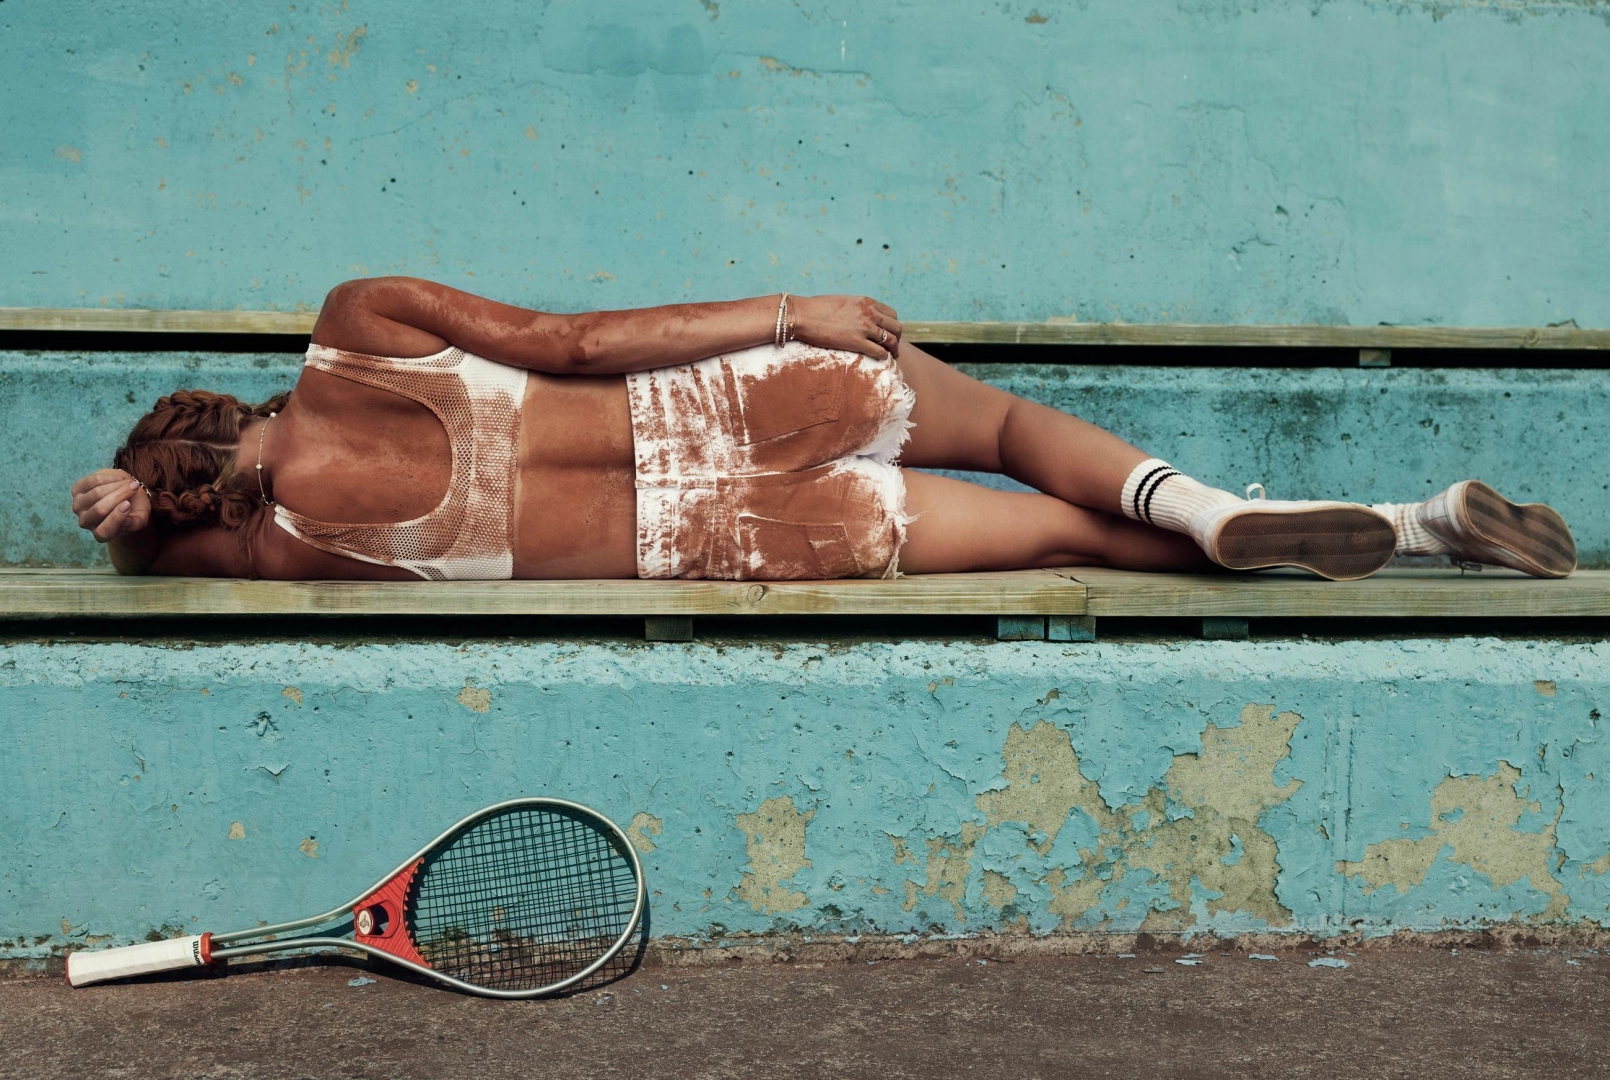 Tennis Garden Exhibition: Fragility and Strength in a Cloud of Clay